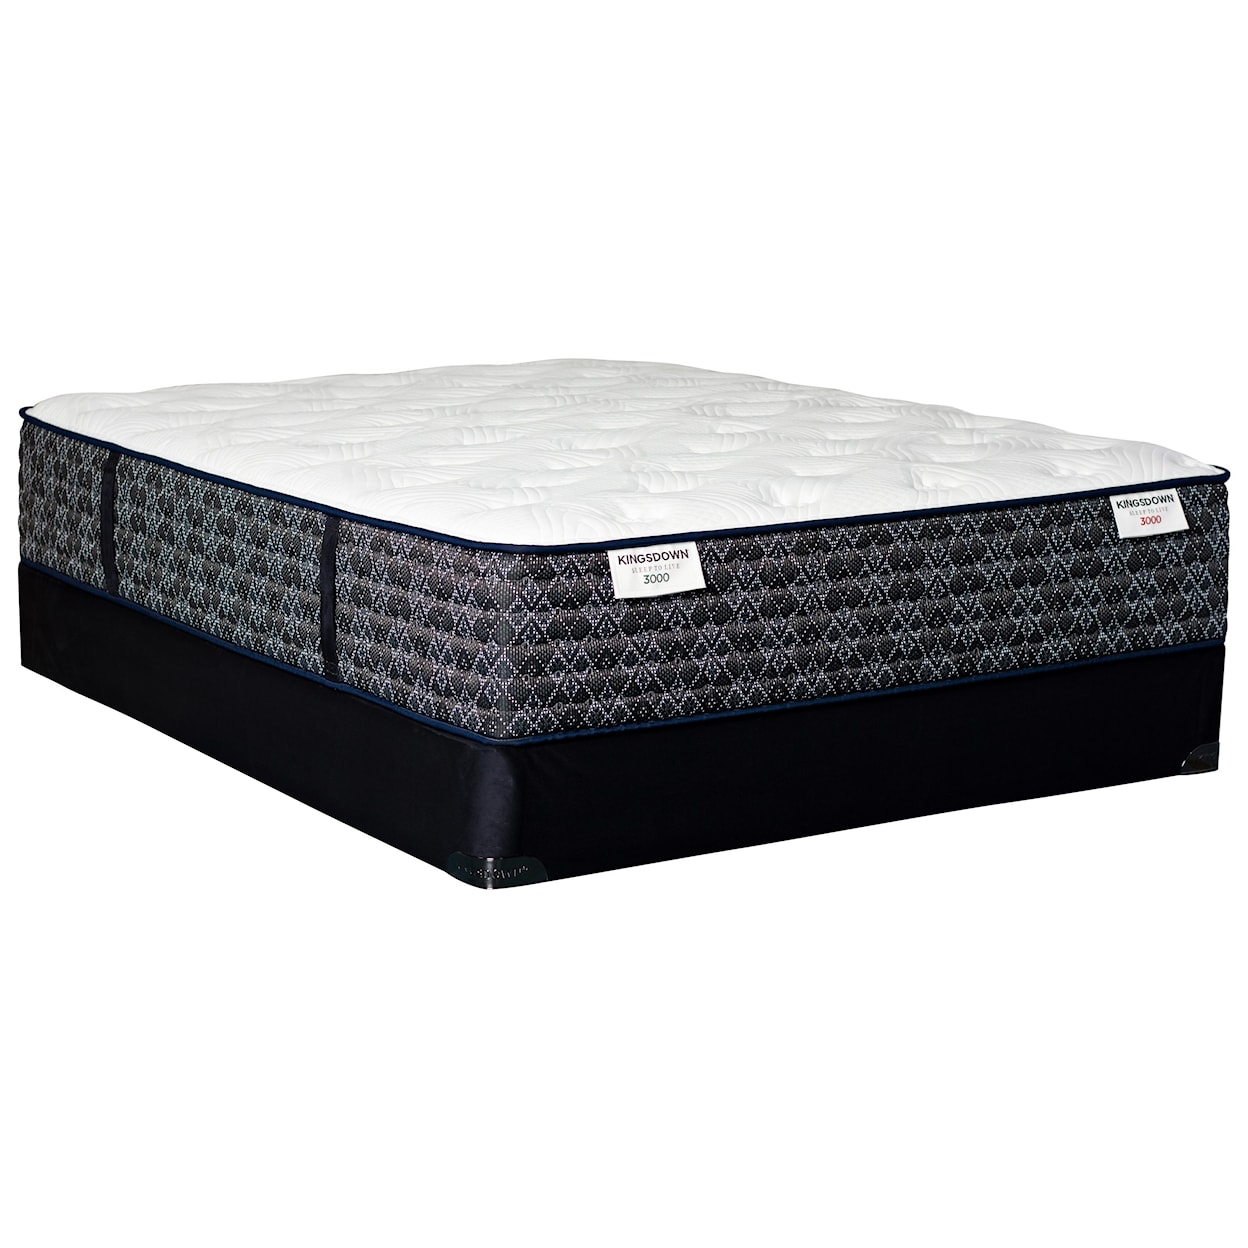 Kingsdown Sleep to Live 3000 Gold Blue Full Pocketed Coil Mattress LoPro Set